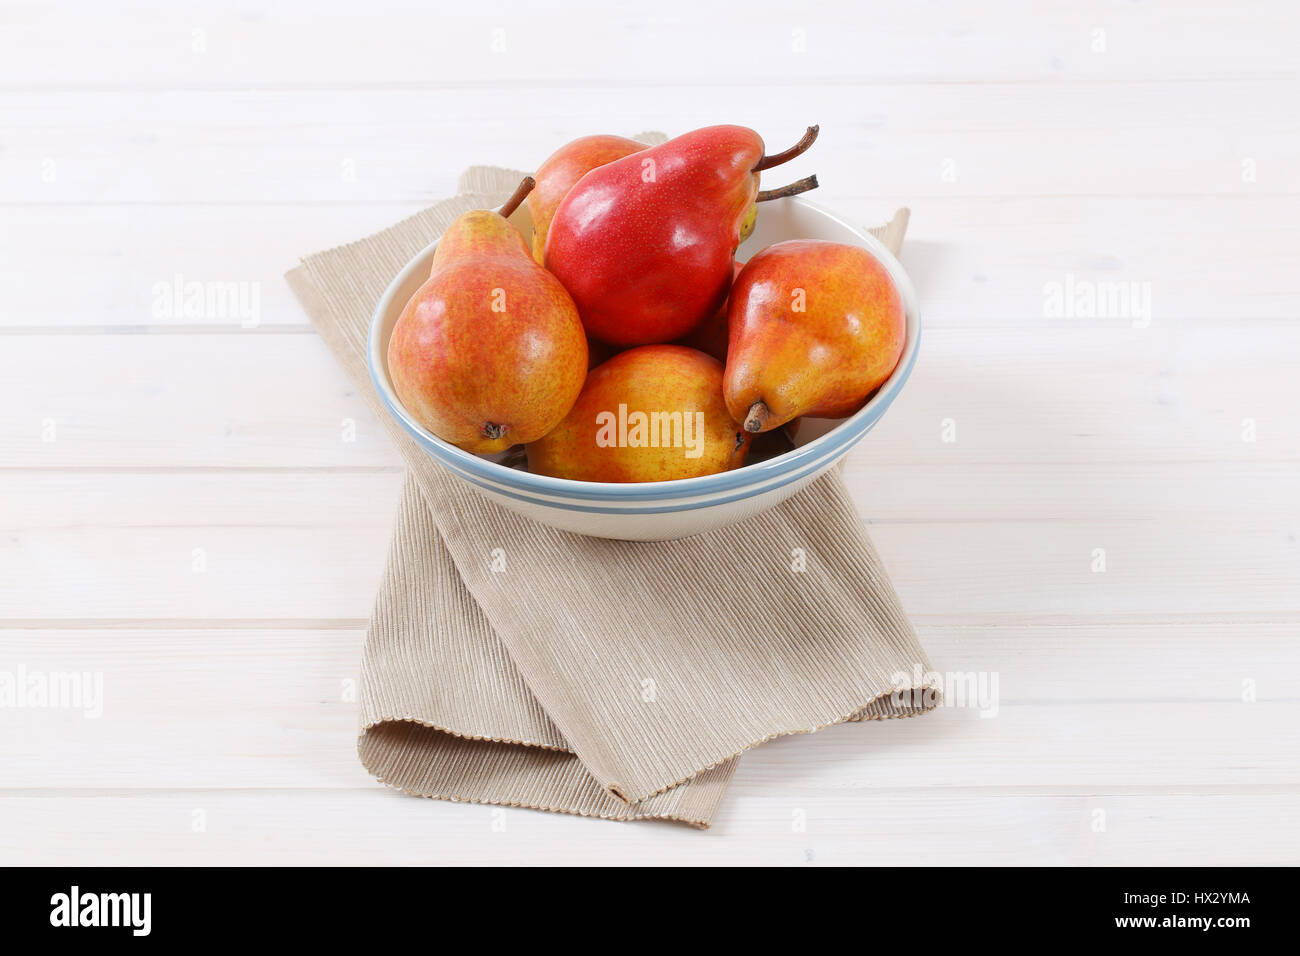 bowl of ripe red pears on white background Stock Photo